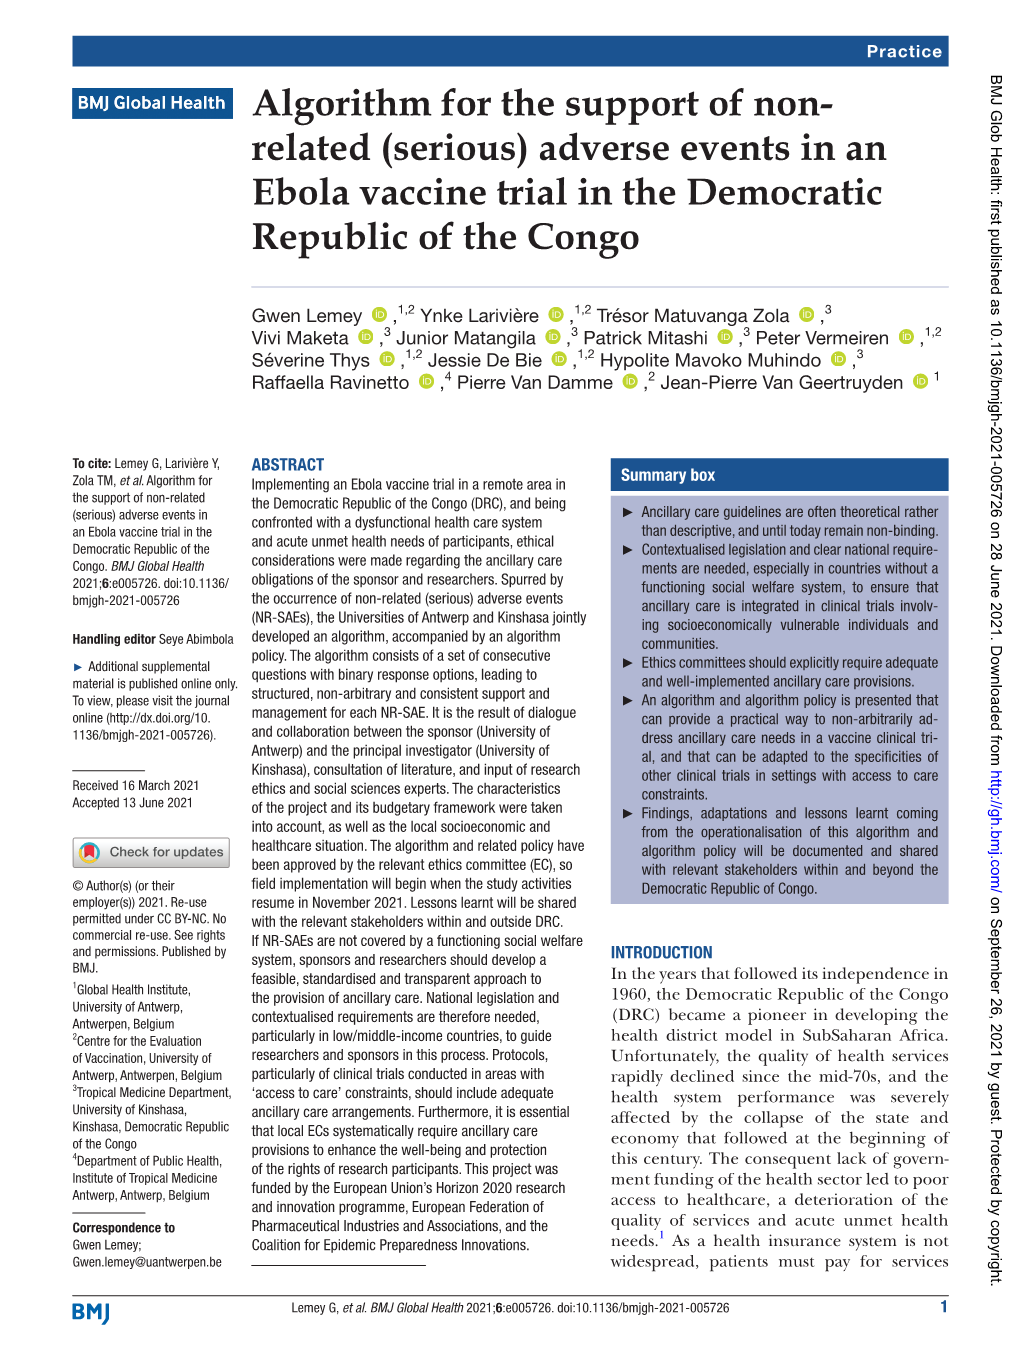 Algorithm for the Support of Non-Related (Serious) Adverse Events in an Ebola Vaccine Trial in the Democratic Republic of the Co